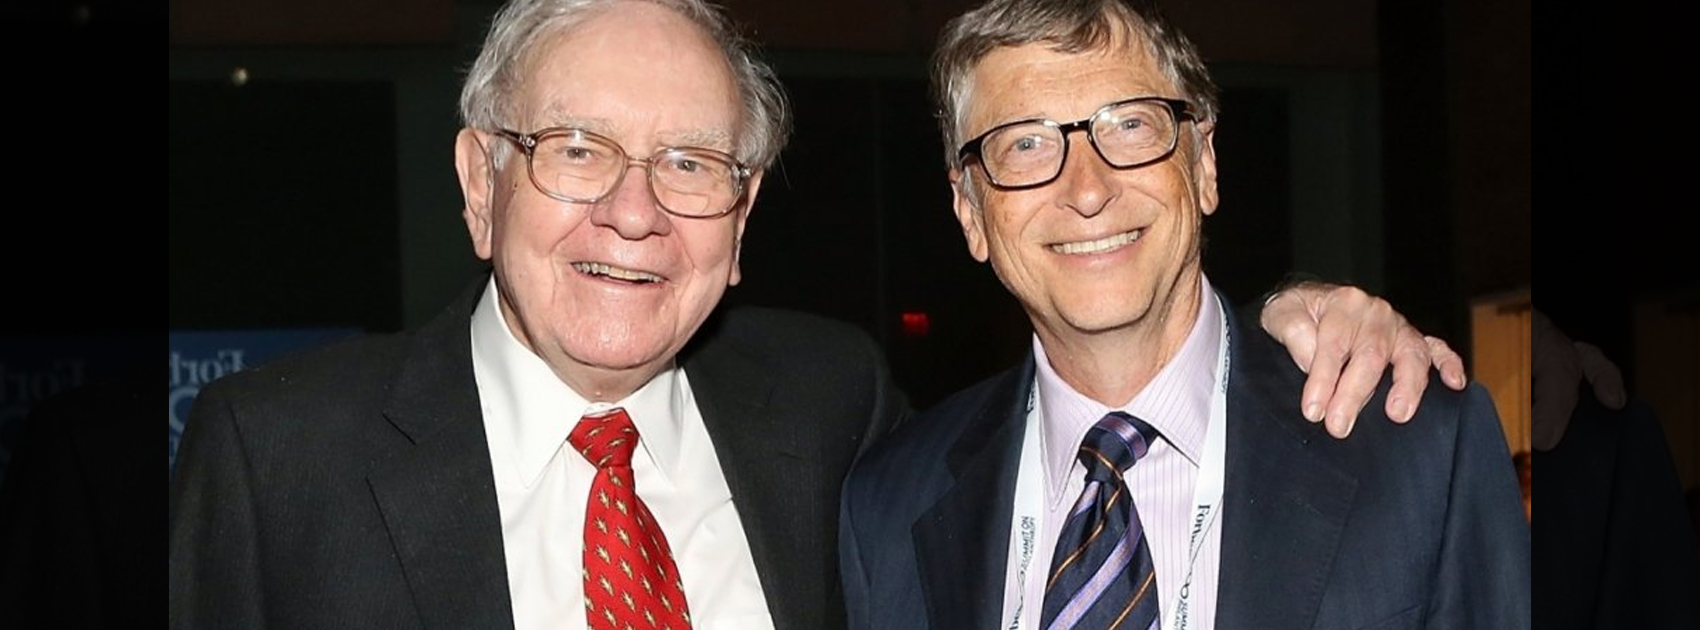 Incredible Friendship Of Bill Gates and Warren Buffett,Startup Stories,How Bill Gates and Warren Buffett met,Billionaire BFFs Warren Buffett and Bill Gates went mattress shopping,Warren Buffett Essay Read,Friendship With Warren Buffett Was Completely Unexpected